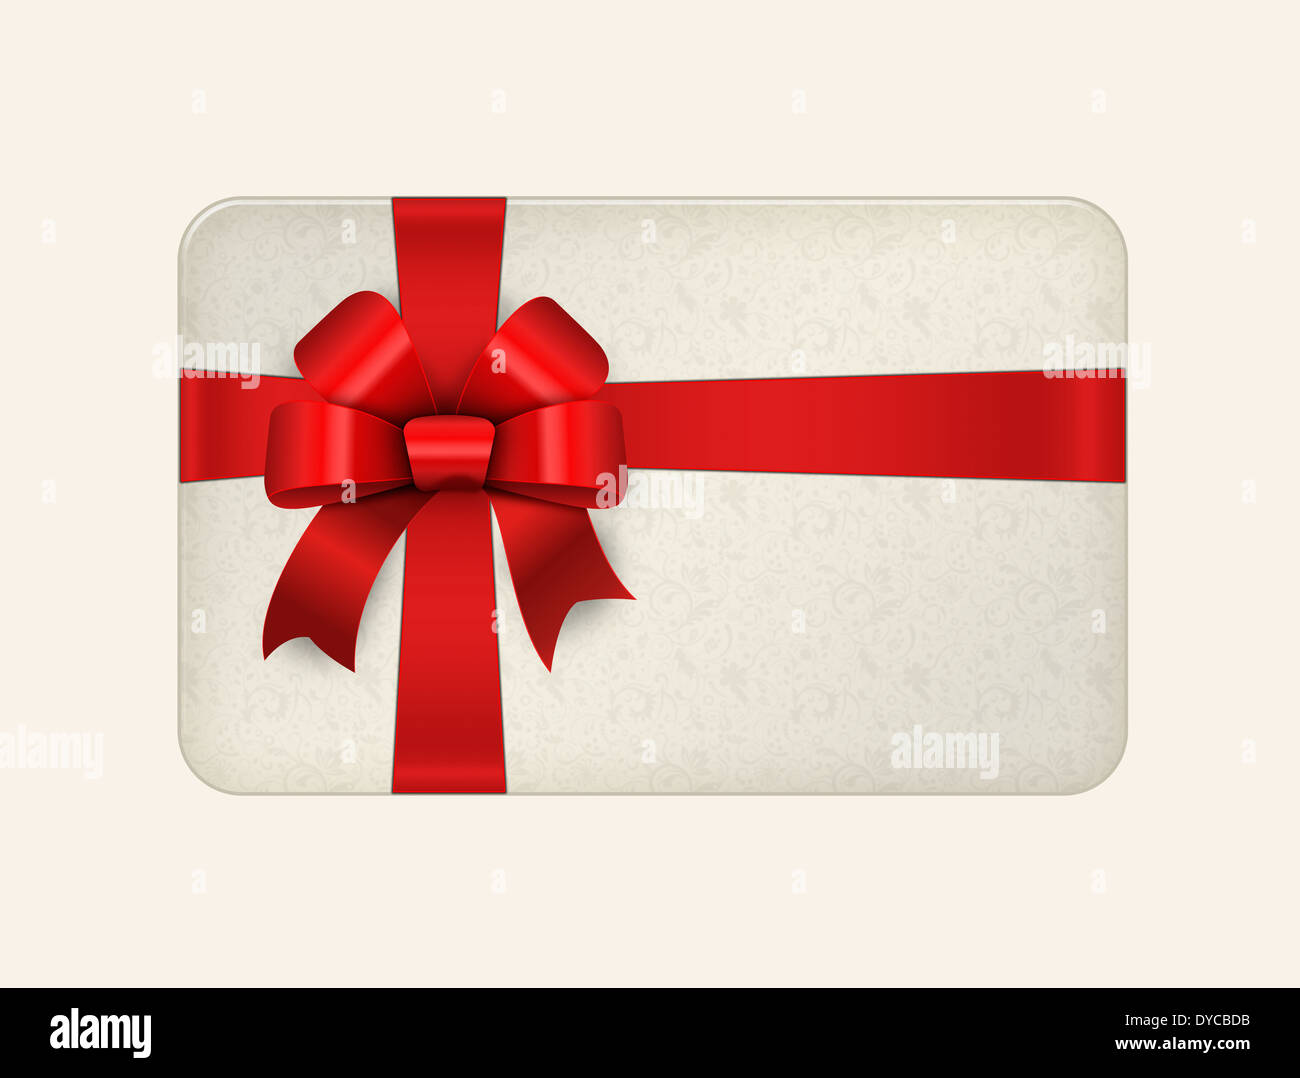 Digitally generated image of gift card. Stock Photo